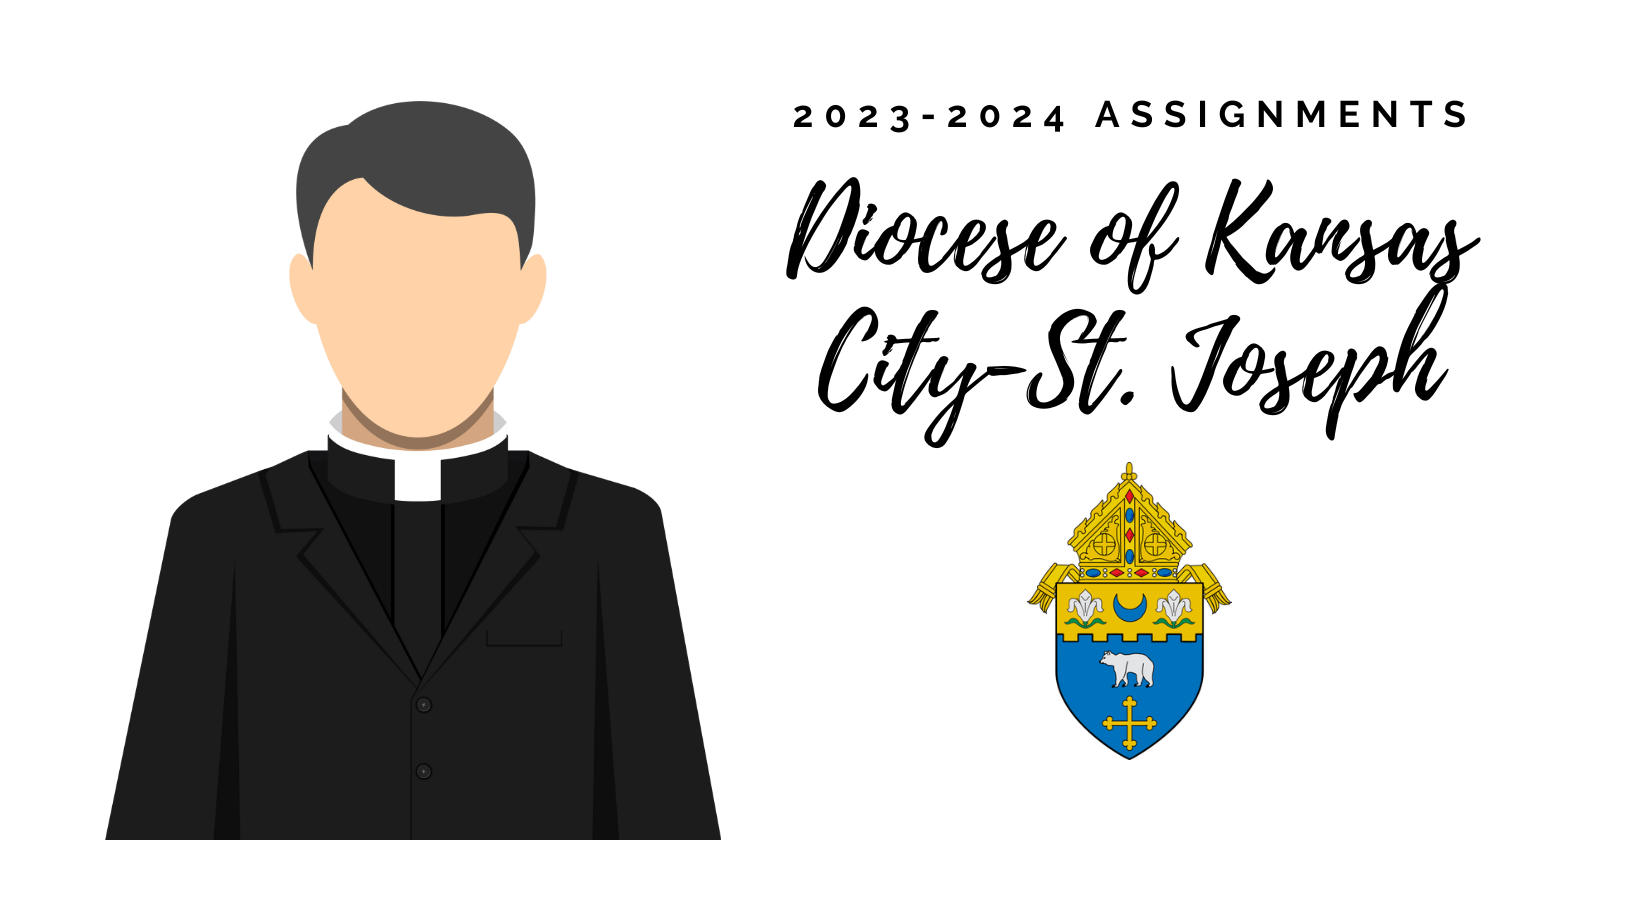 archdiocese of chicago priest assignments 2022